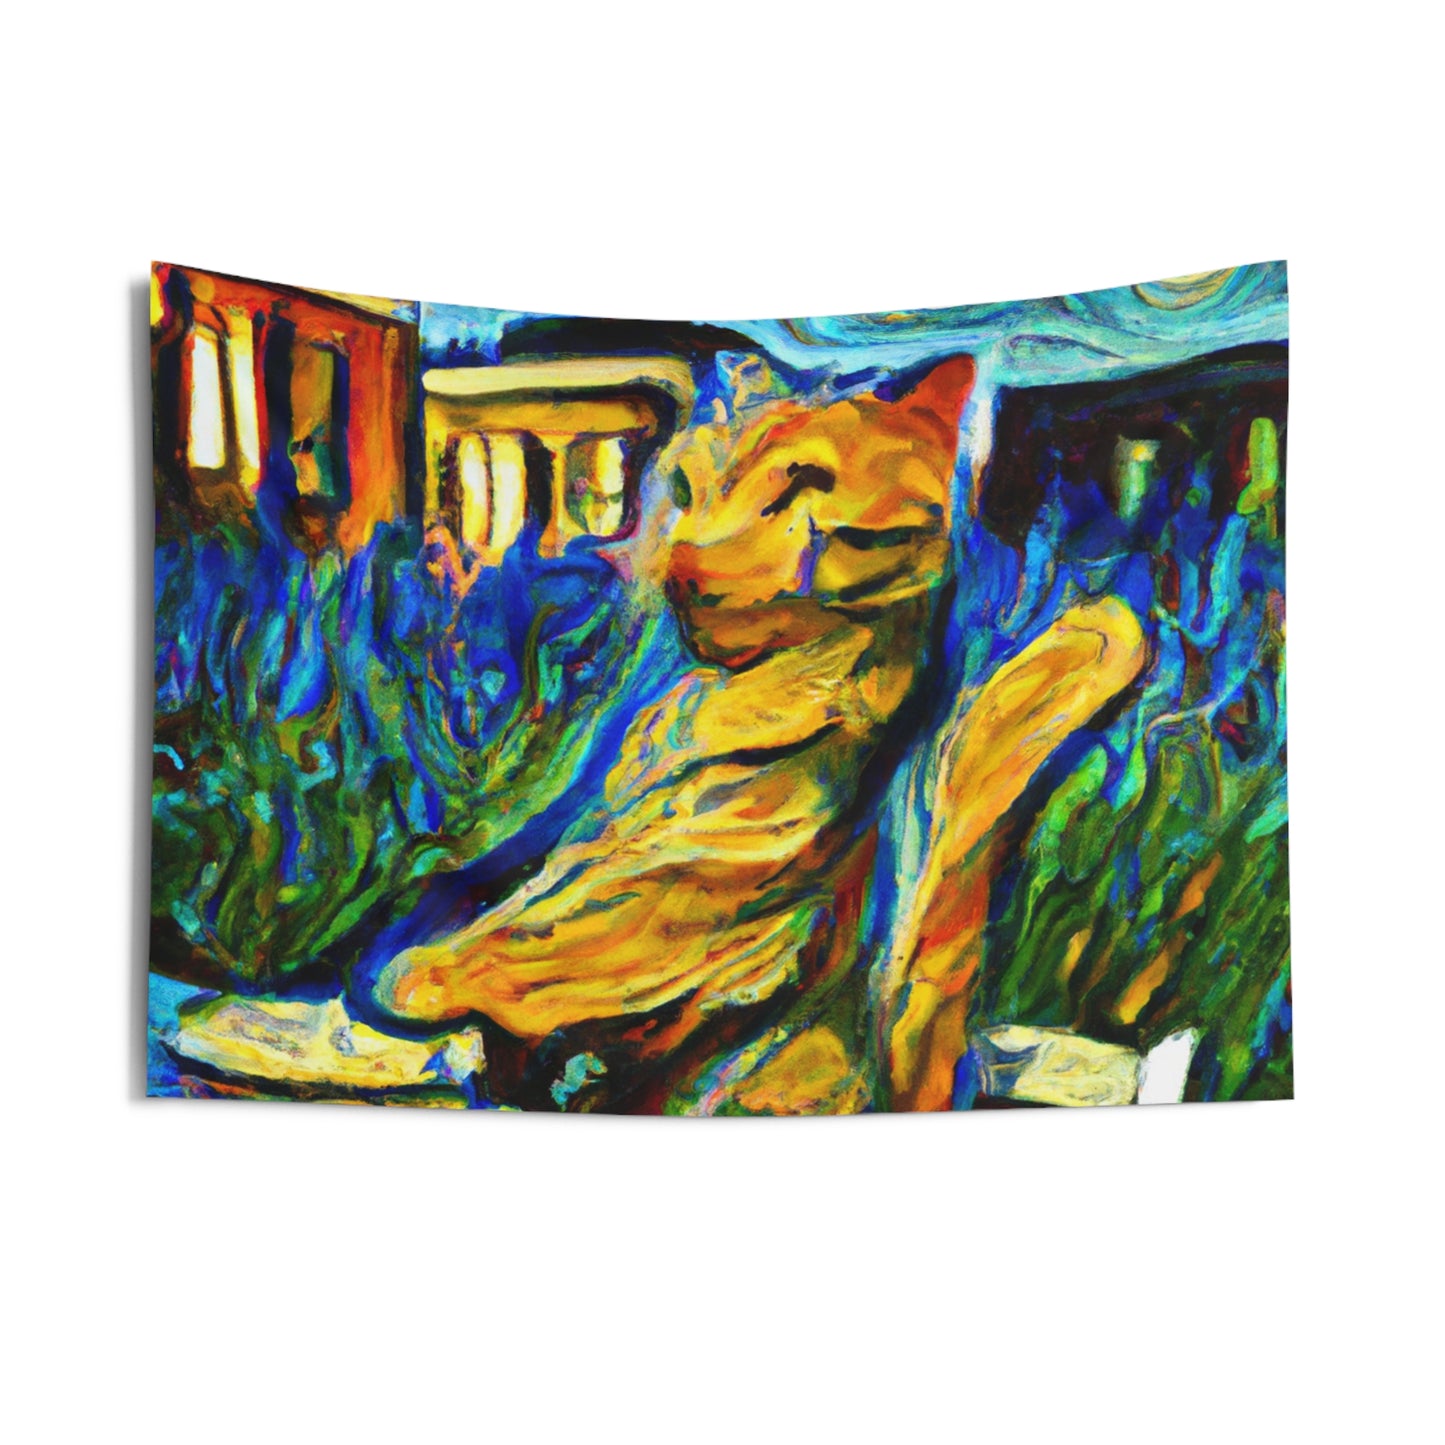 "A Cat Amongst the Celestial Tea Leaves" - The Alien Wall Tapestries